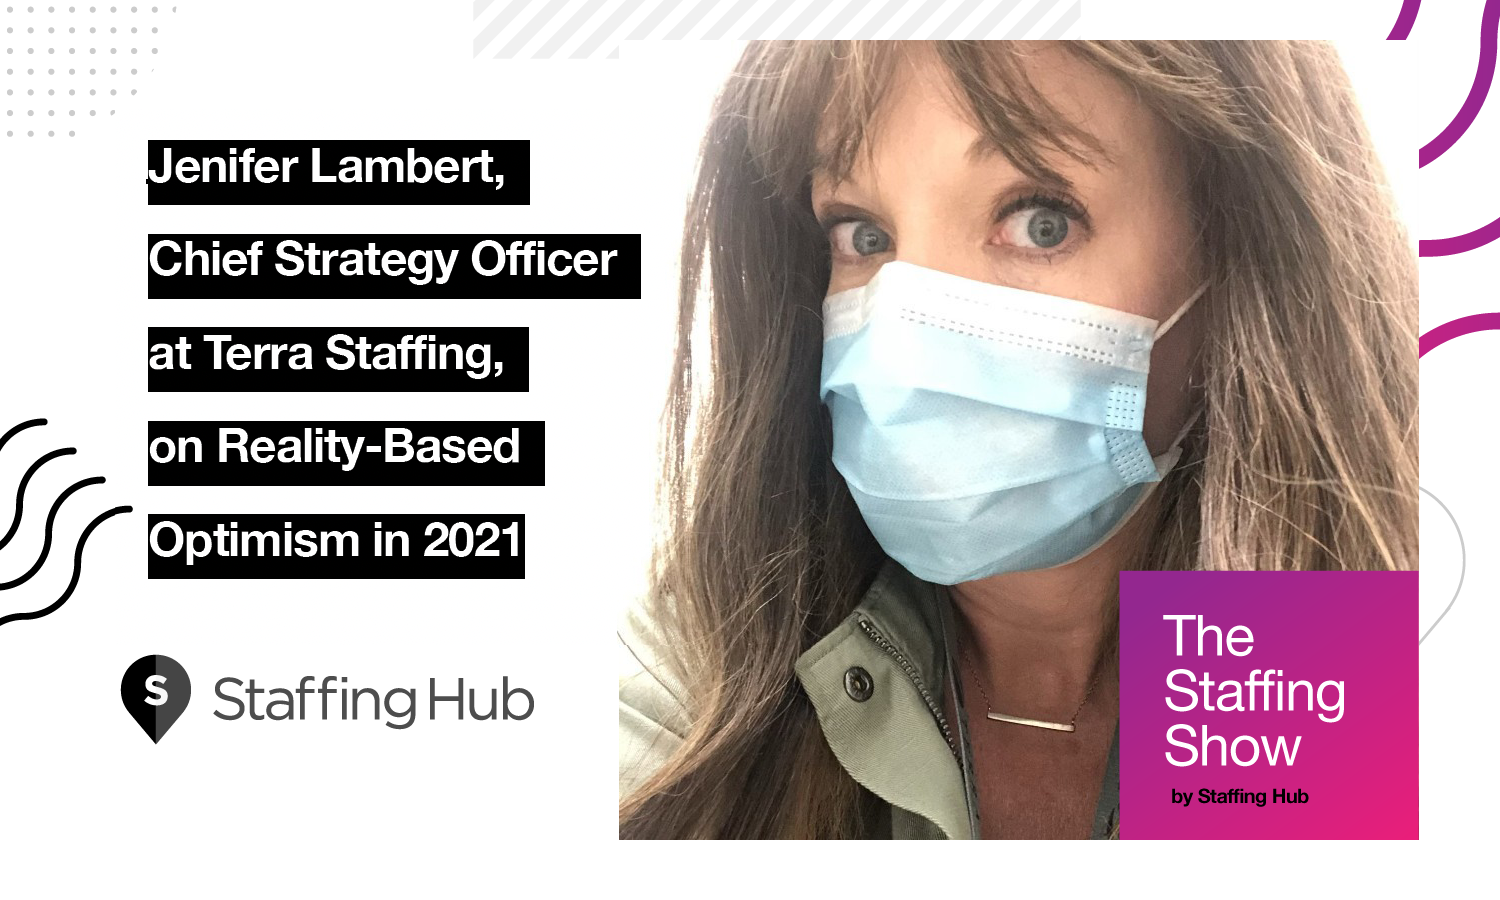 Jenifer Lambert, Chief Strategy Officer at Terra Staffing, on Reality-Based Optimism in 2021